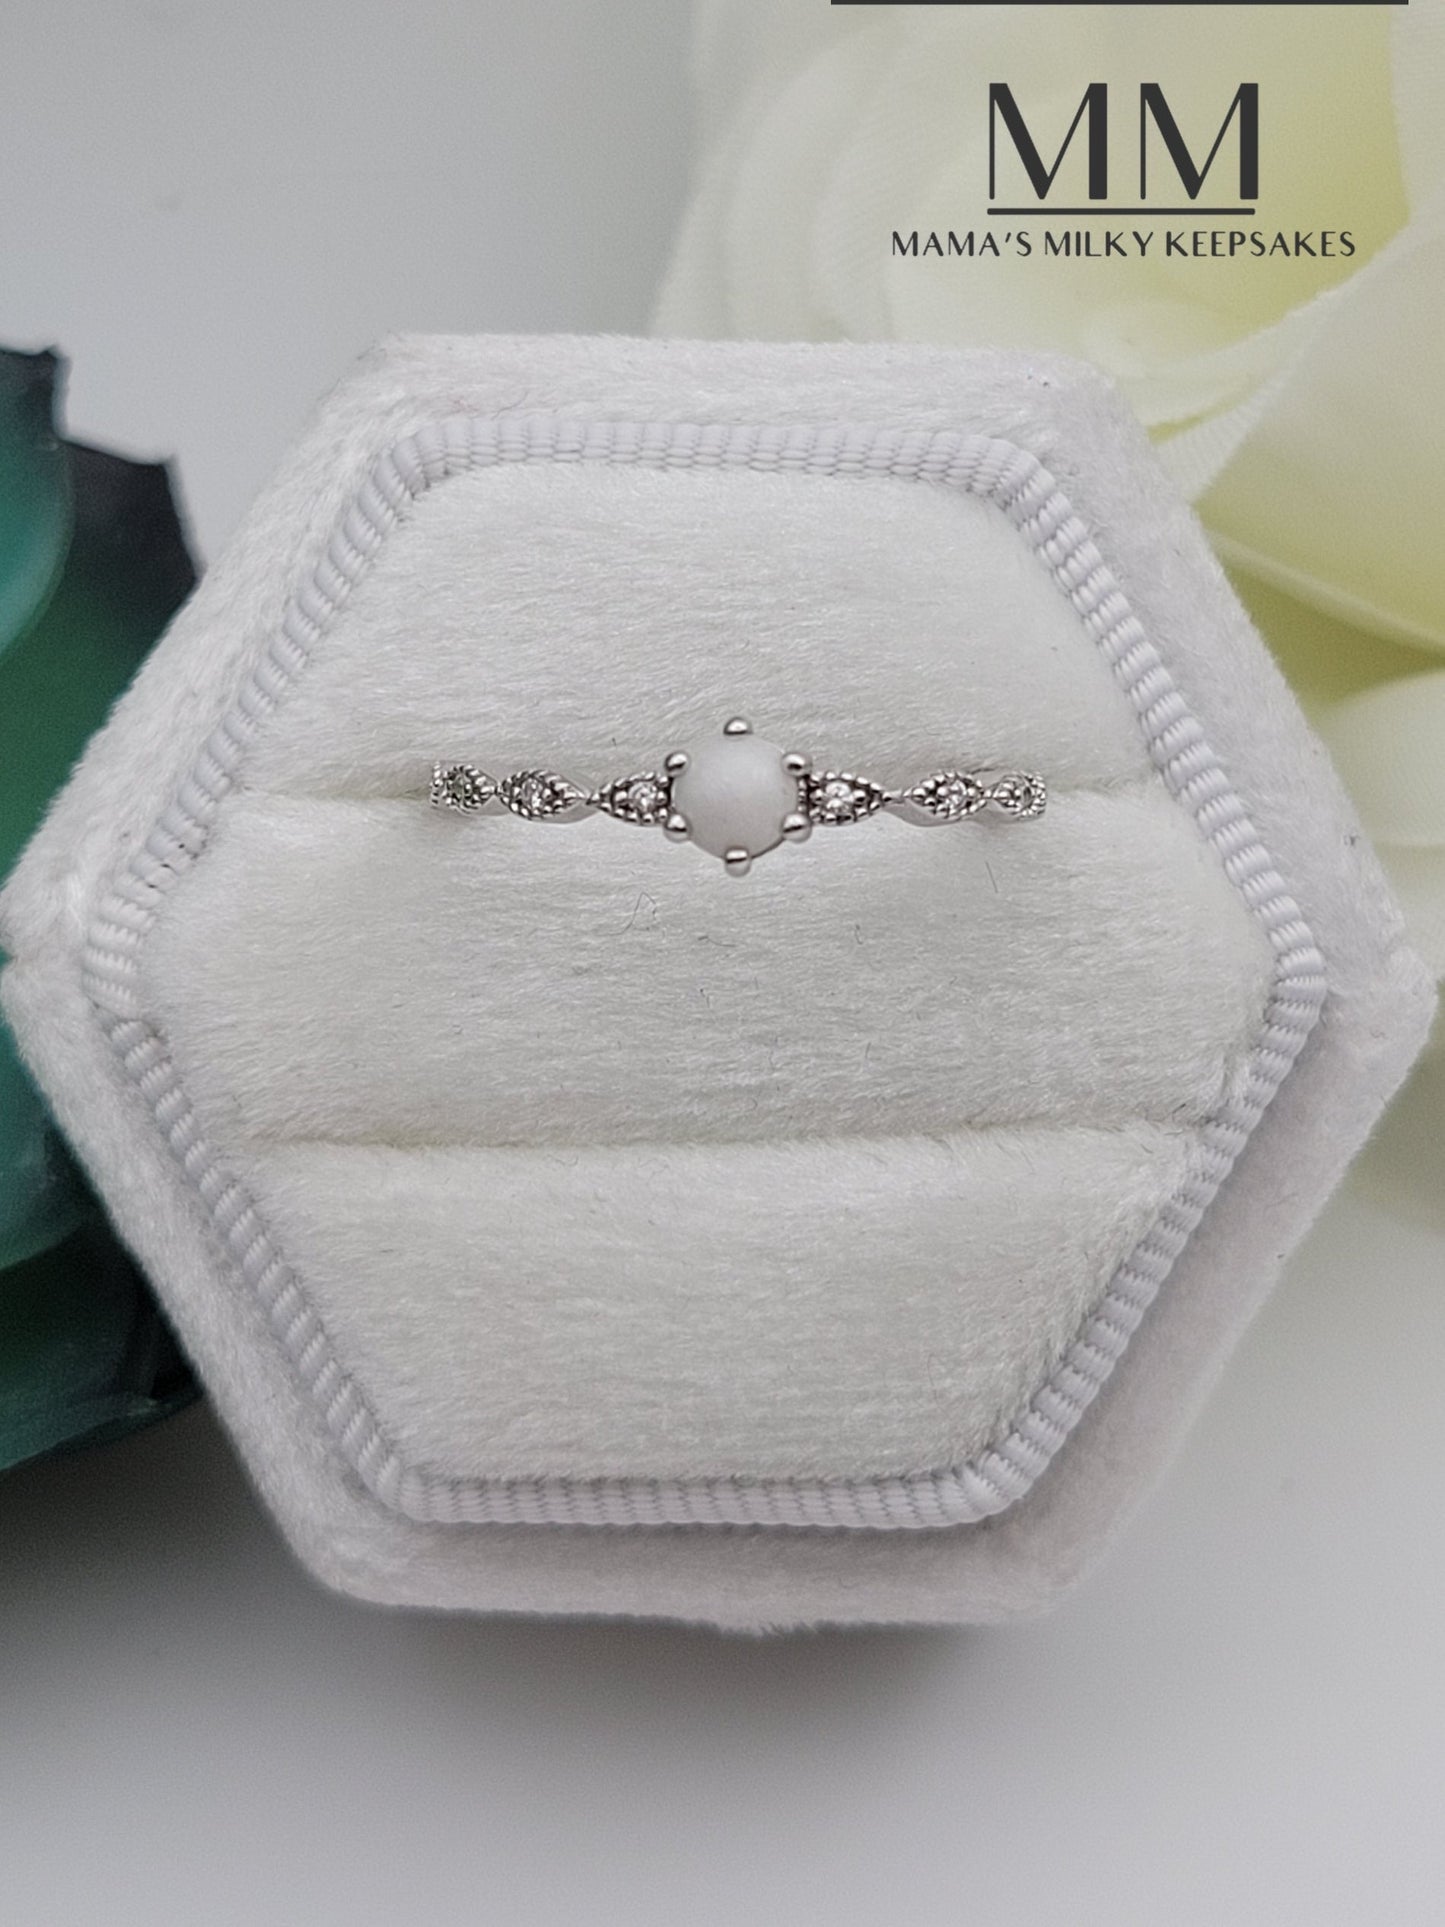 Breastmilk Round Ring, Cremation Round Ring, Keepsake Round Ring, Sterling Silver Round Ring, Hair Ring, Ash Ring, Umbilical Cord Ring, BreastmilkJewelry Round Ring